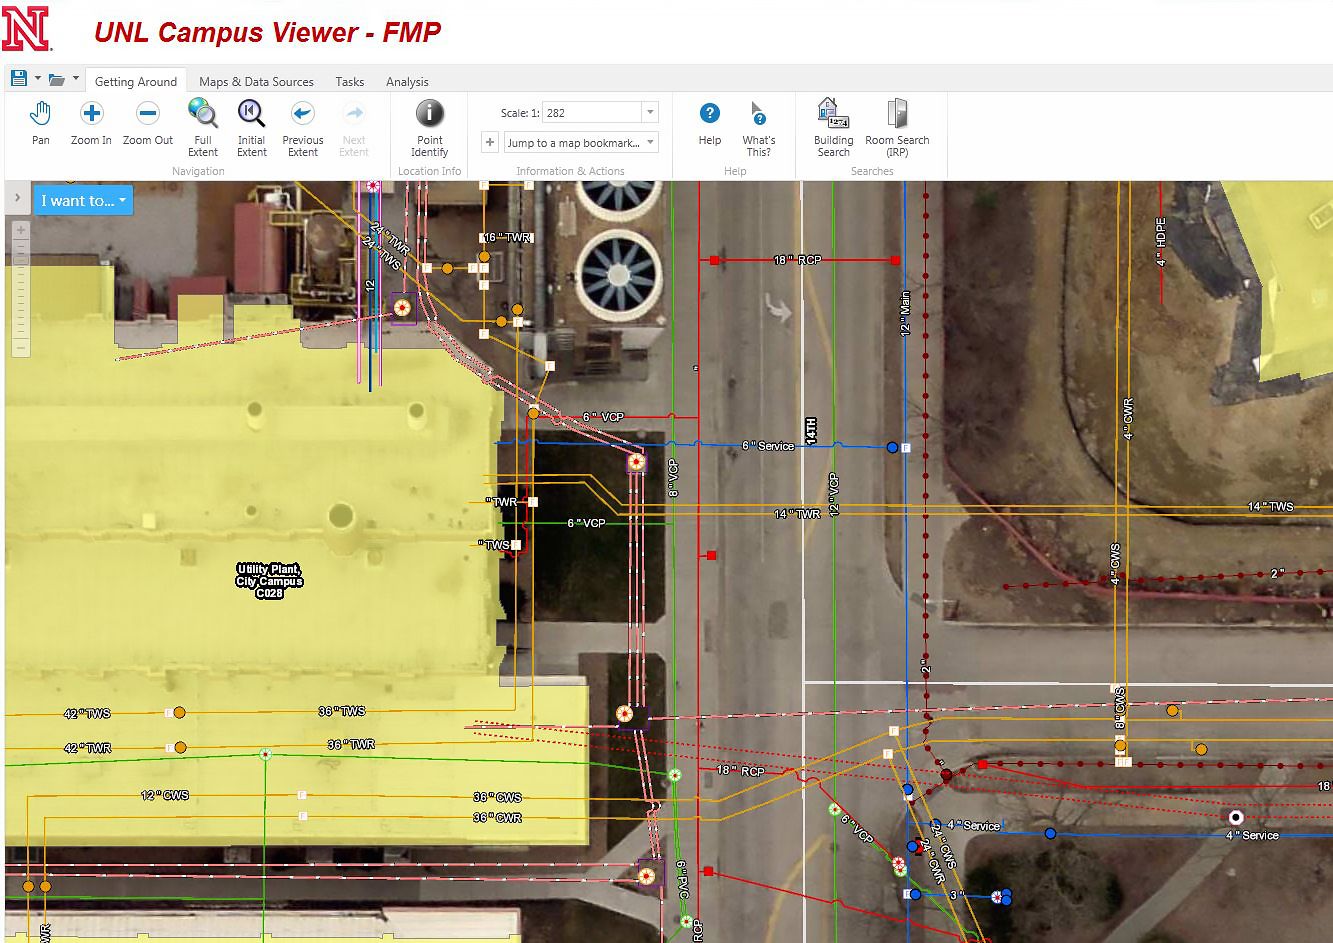 Example of GIS mapping for buildings and utility lines